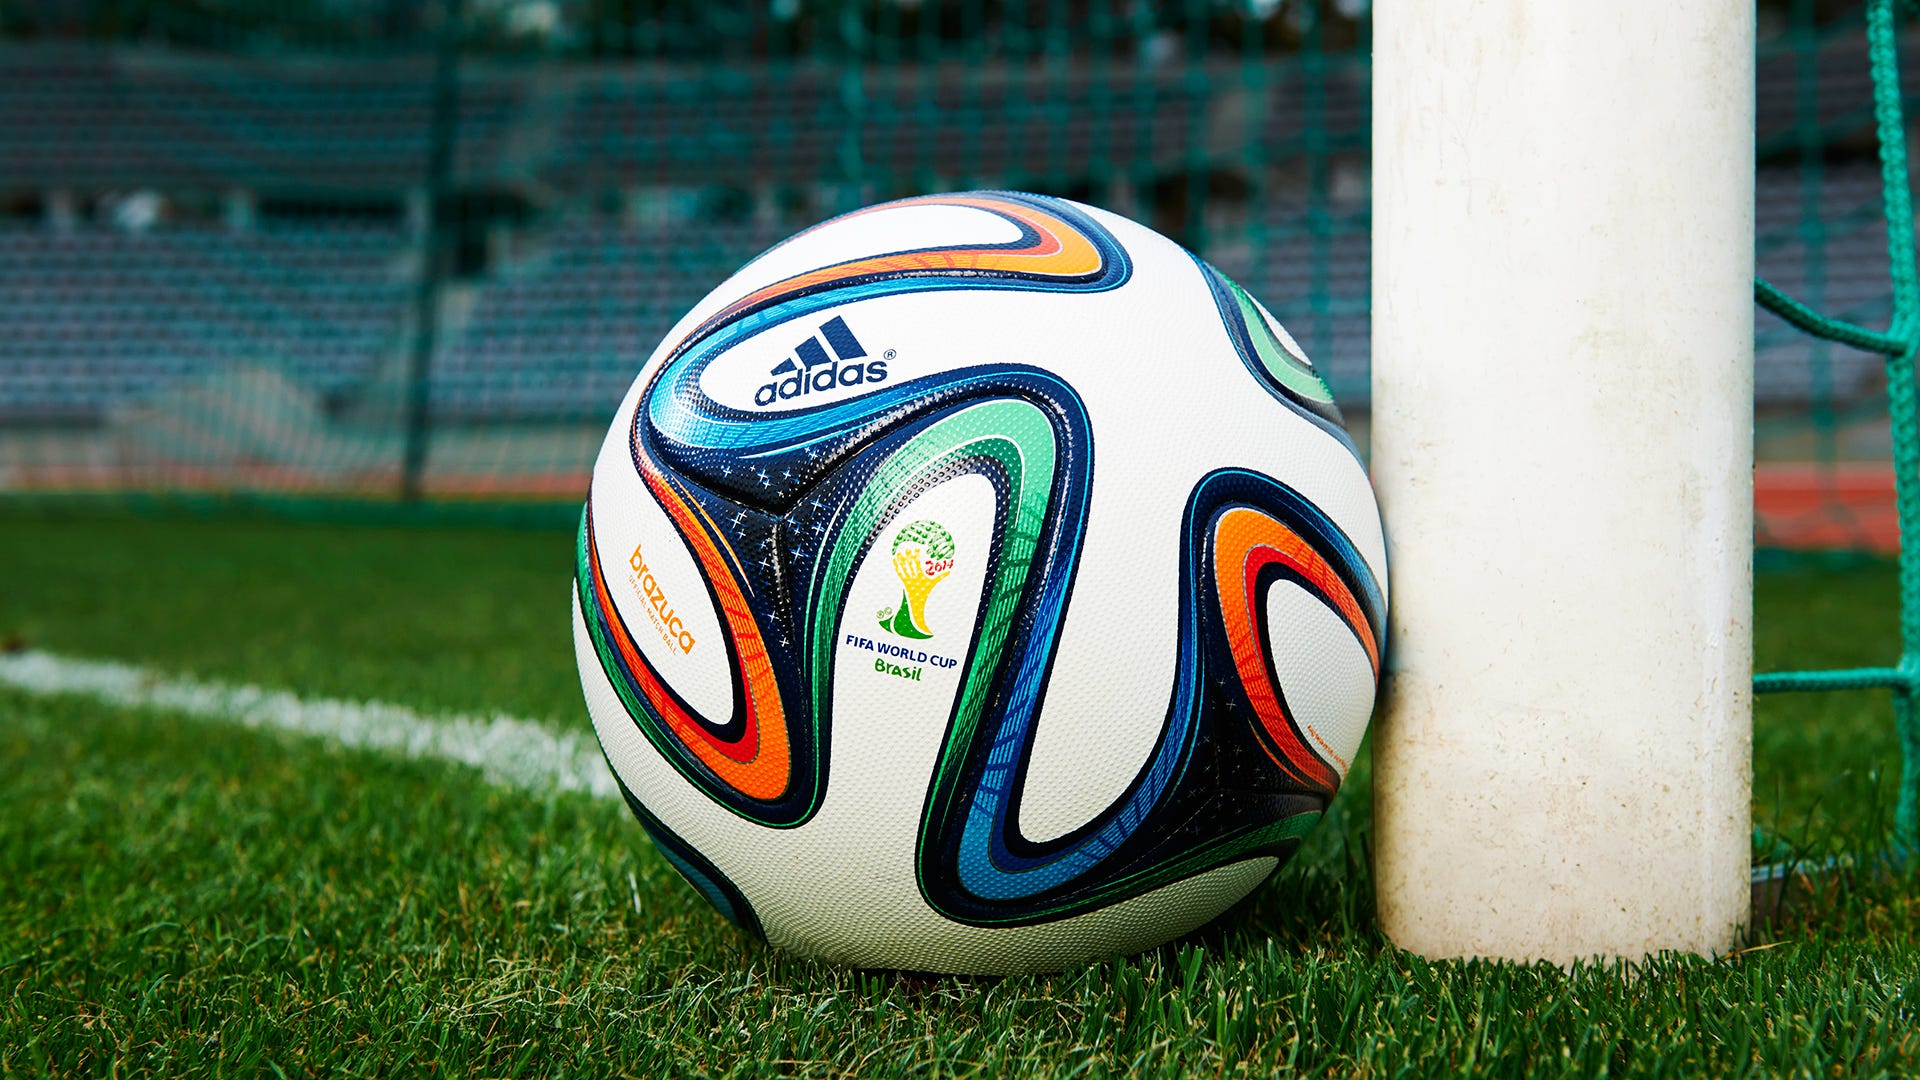 10 things to know about Brazuca. Official football for FIFA World